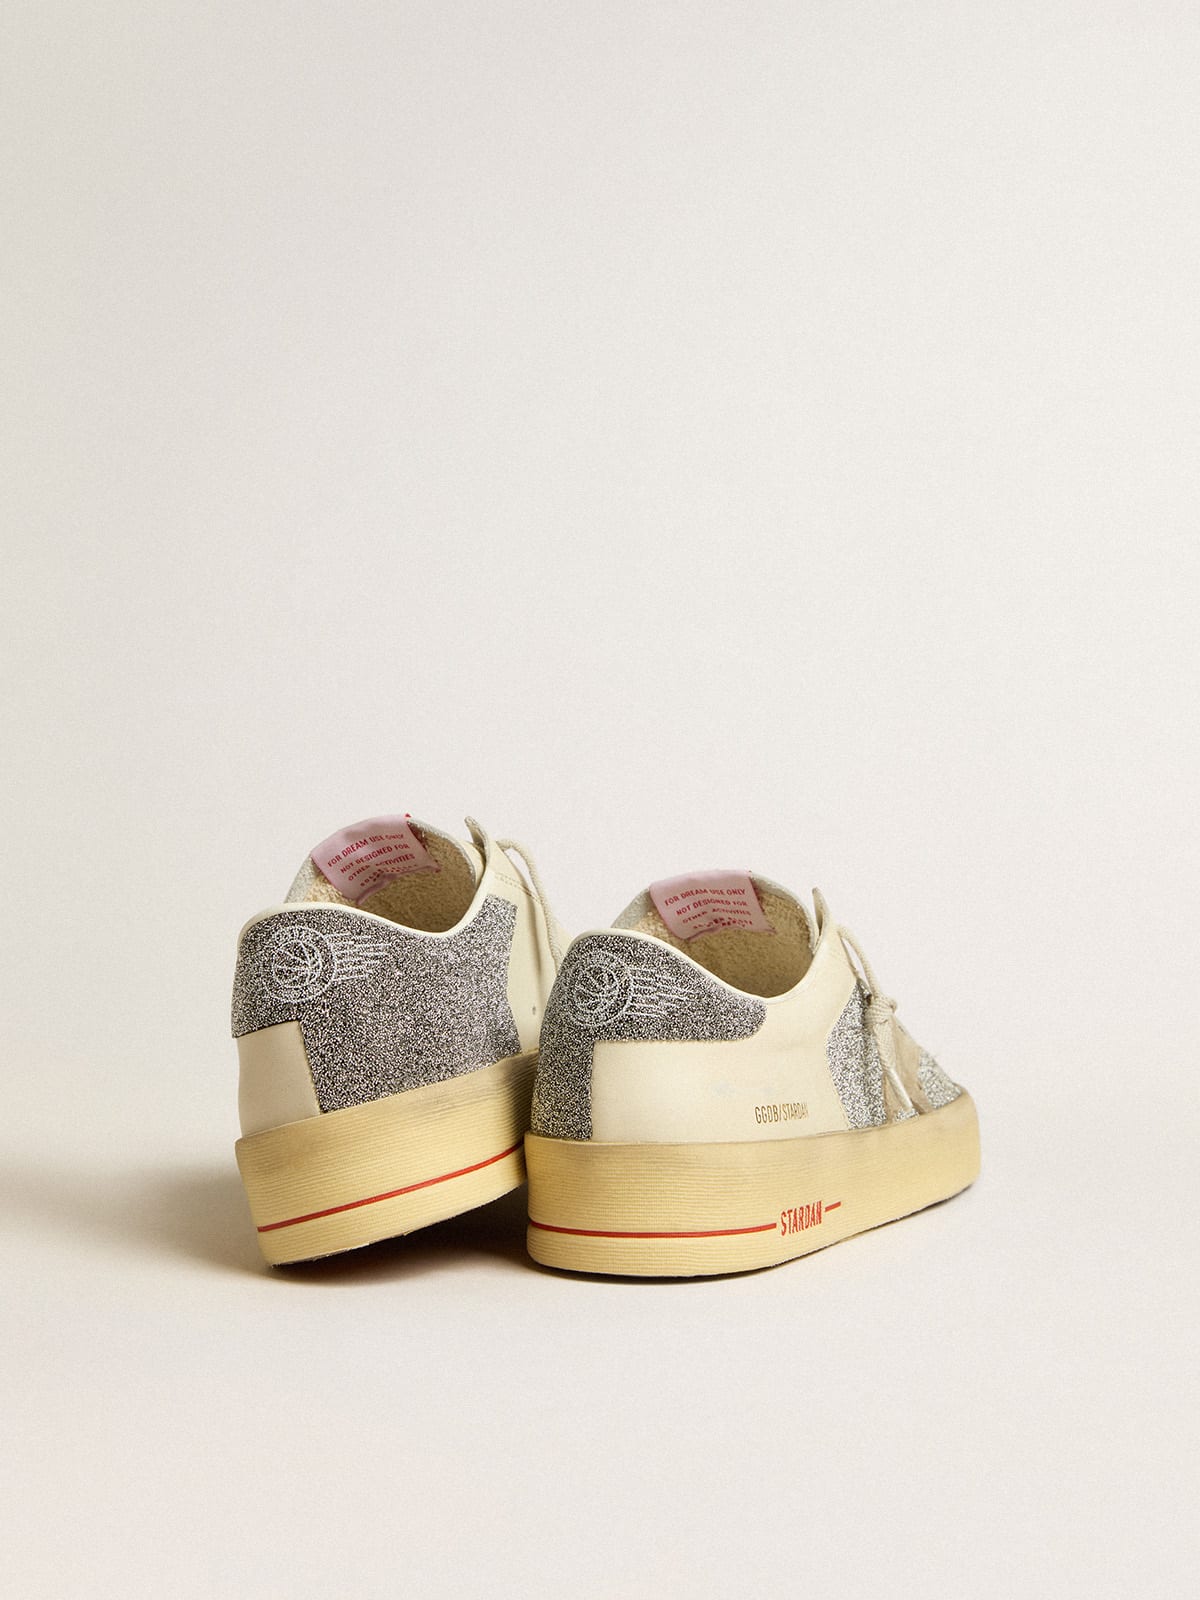 Golden Goose - Men's Stardan in suede with sand star and silver crystal inserts in 